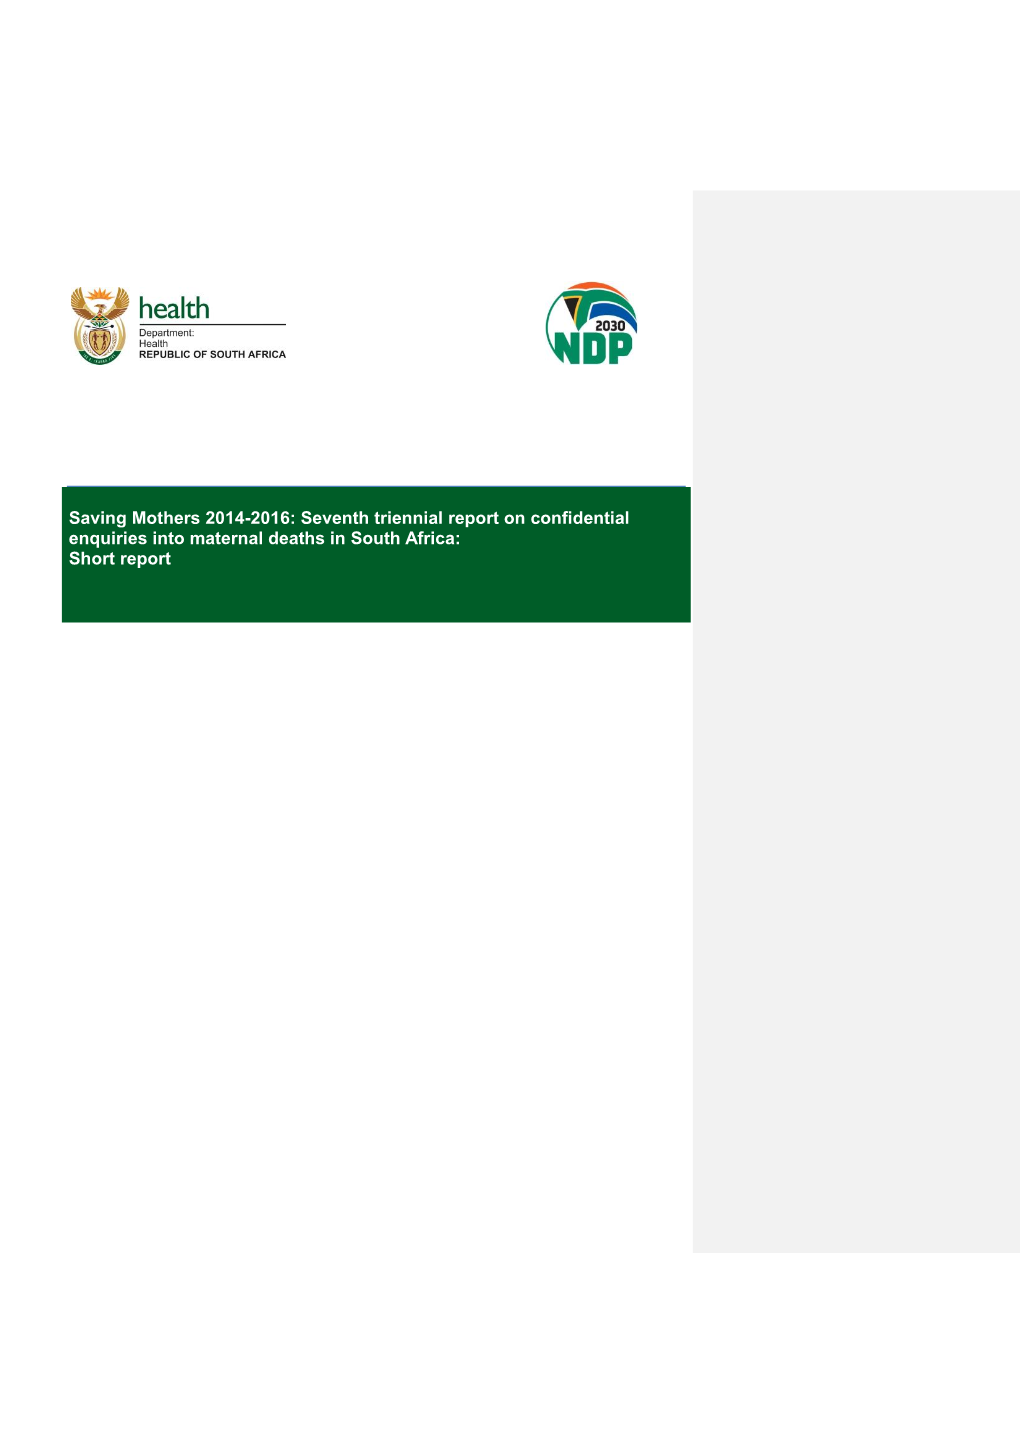 Saving Mothers 2014-2016: Seventh Triennial Report on Confidential Enquiries Into Maternal Deaths in South Africa: Short Report